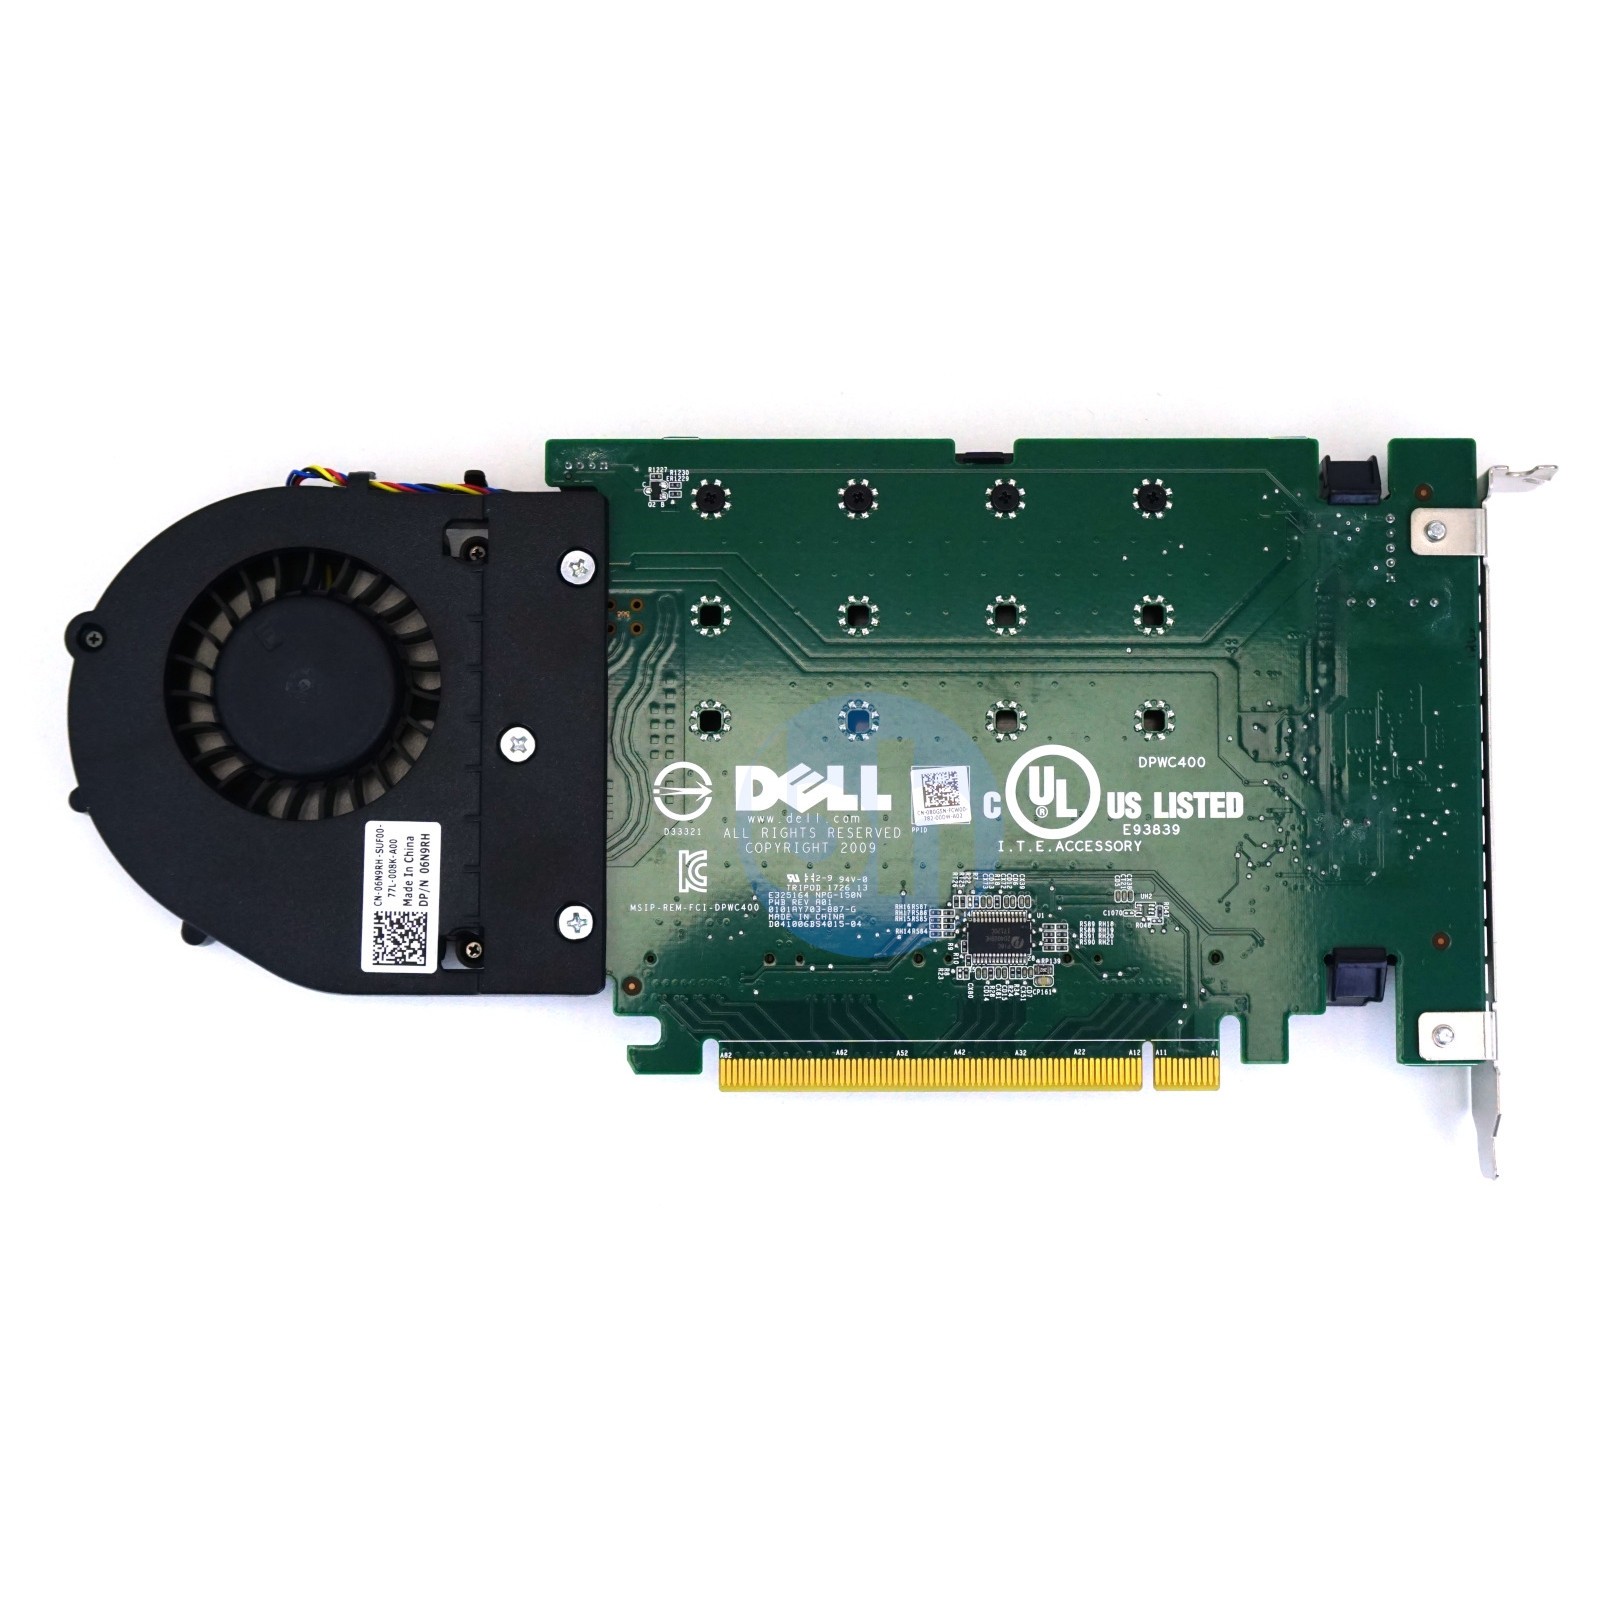 Dell (80G5N) DPWC400 - FH PCIe-x16 Quad  NVMe Adapter with Fan (080G5N)